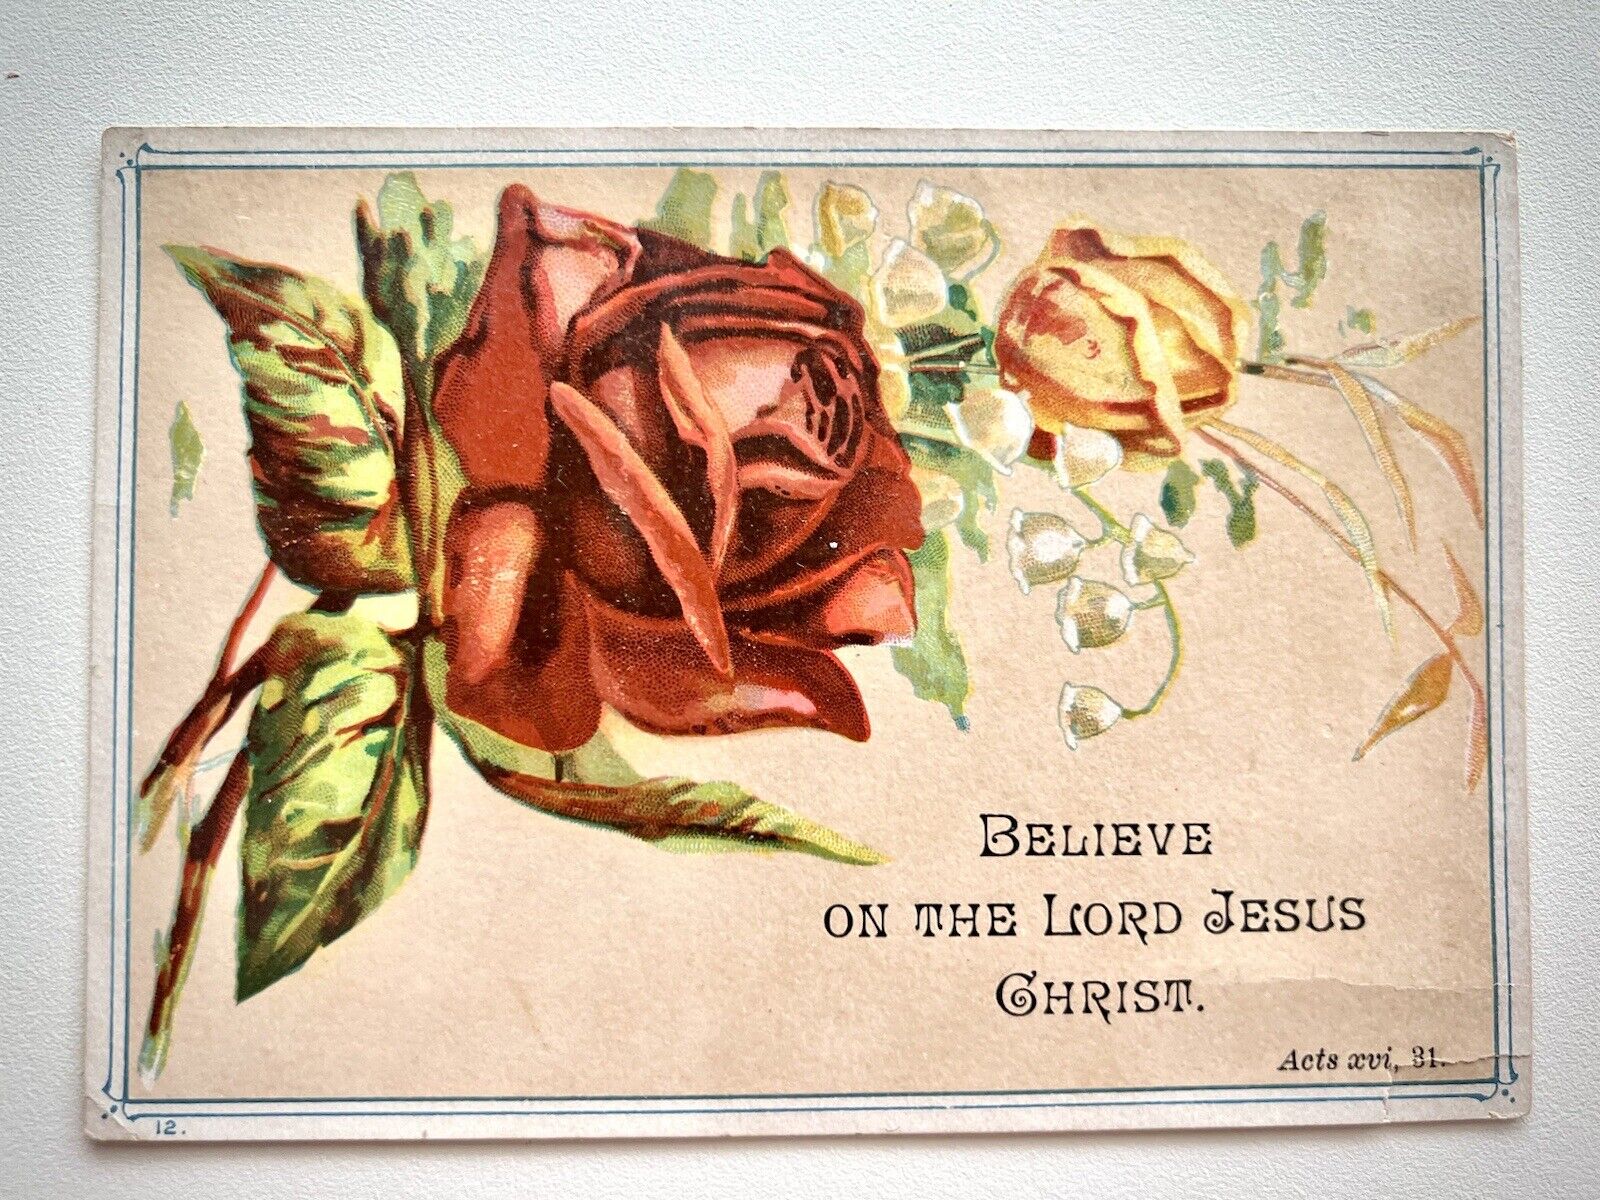 Antique Christmas Postcard USA 1884 - BELIEVE ON THE LORD JESUS CHRIST